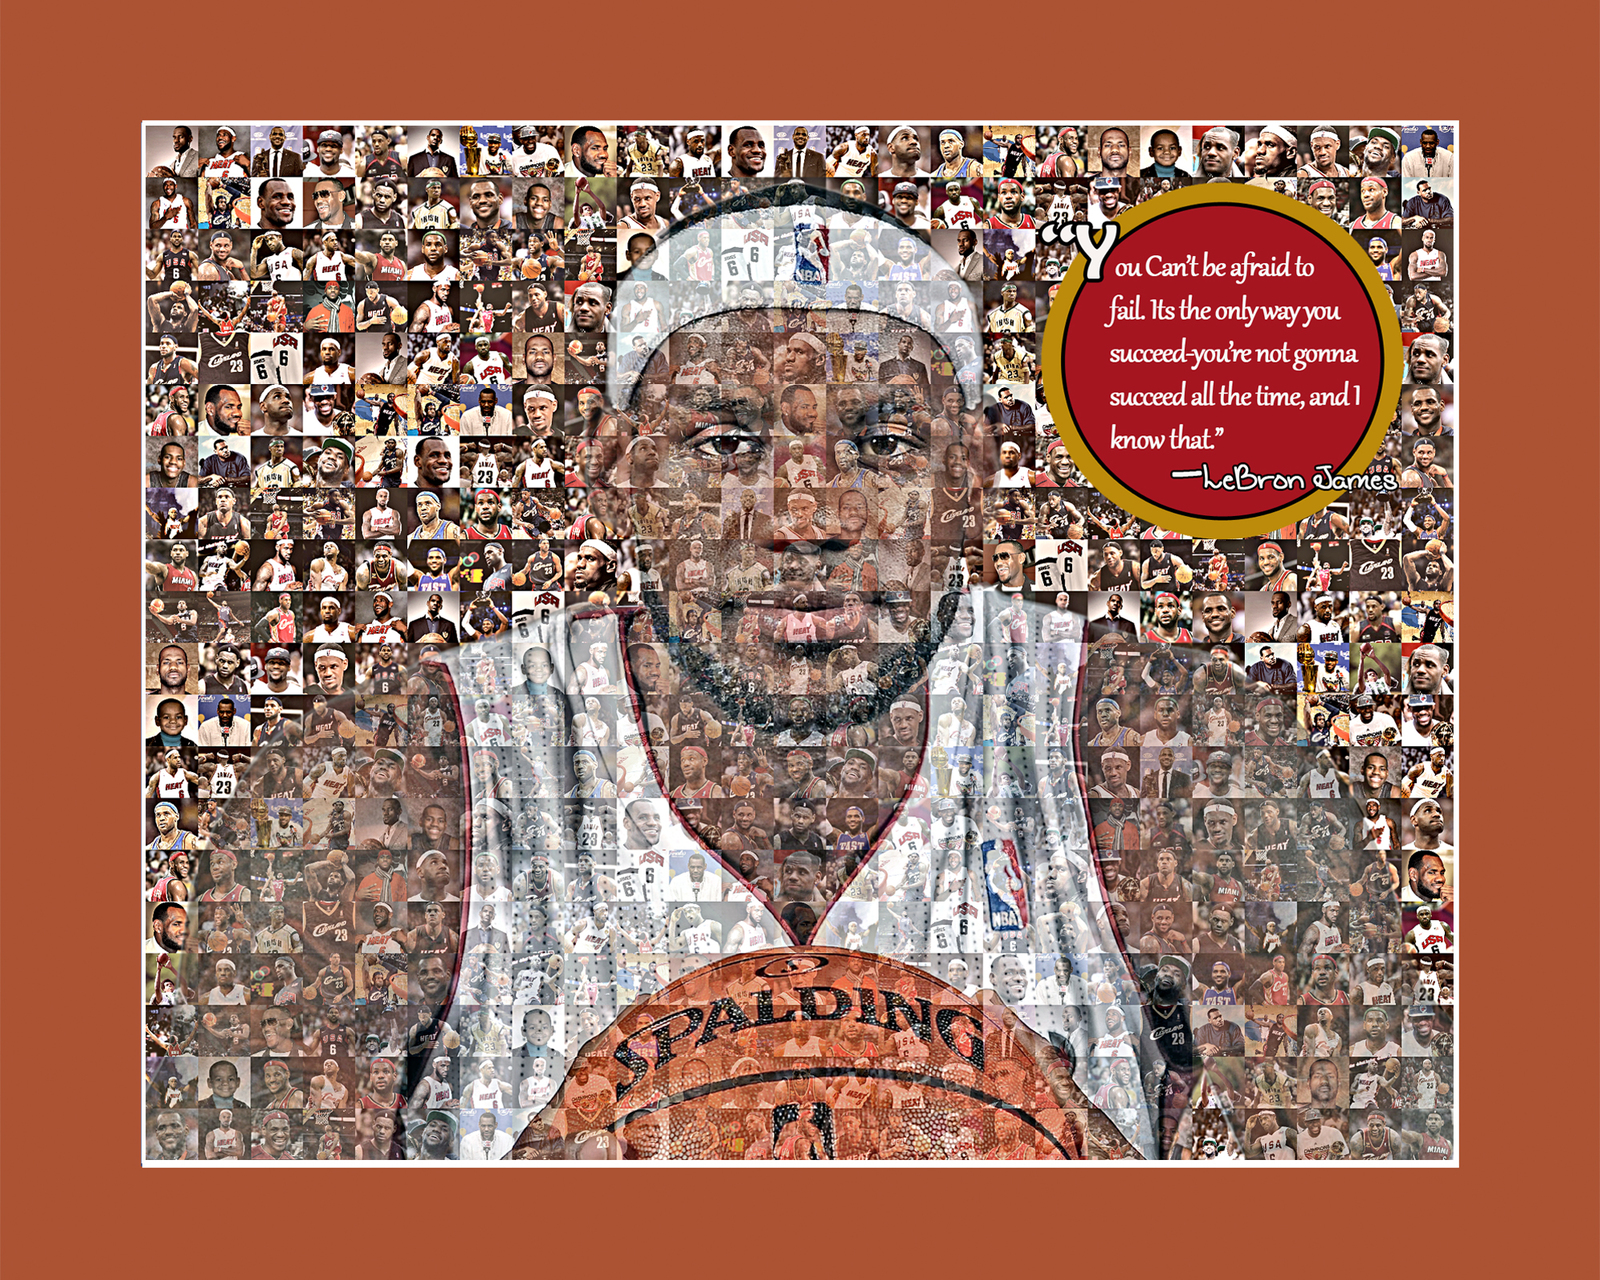 Lebron James Picture Mosaic Print Art Using 50 Player images of Lebron - $20.00